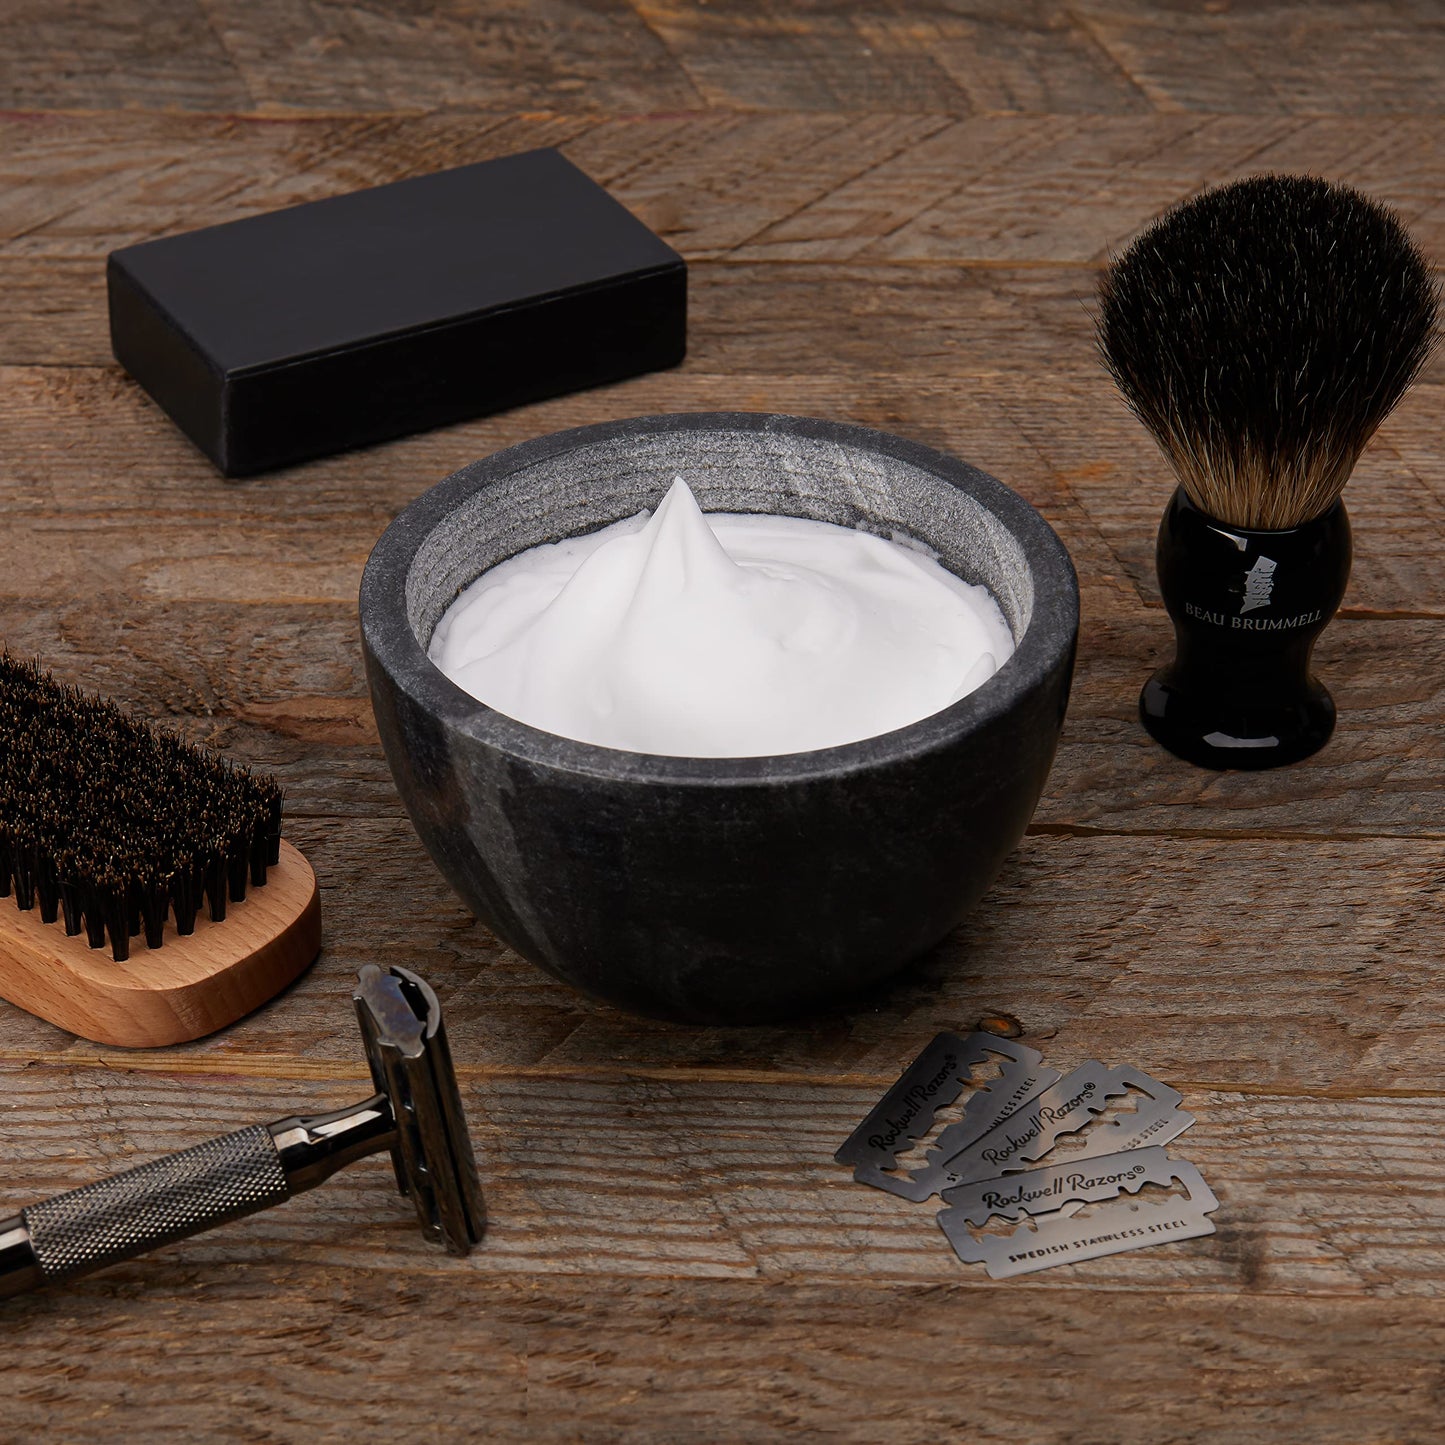 Beau Brummell The Original Marble Shaving Soap Bowl Handmade from 100% Natural Marble with Interior Grooves for Maximum Lather | Heat Retaining Stone Provides a Luxurious Hot Shave Experience